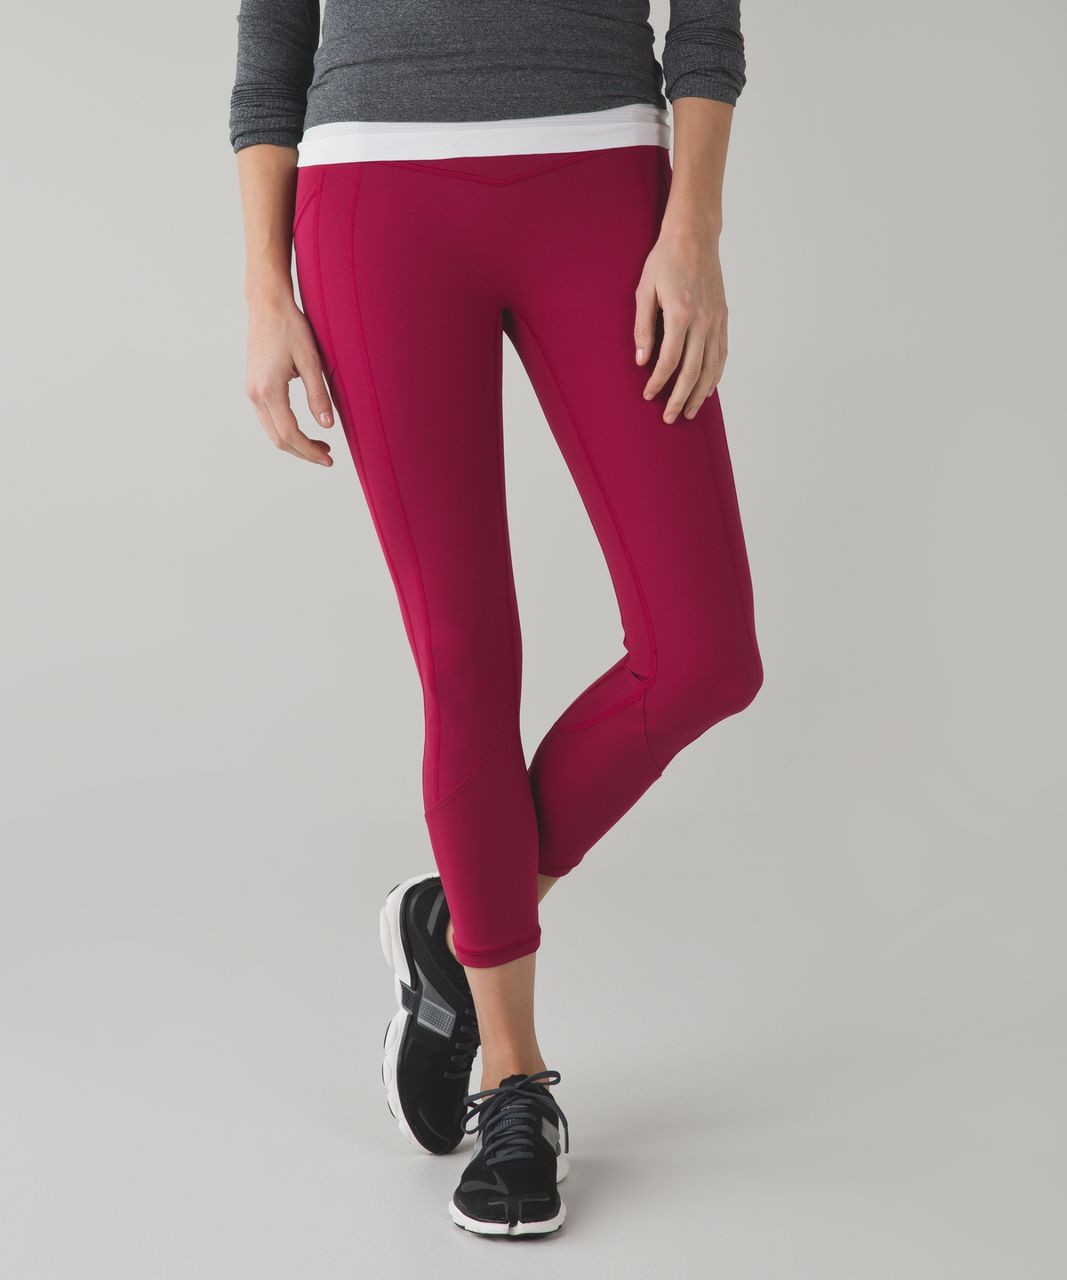 Lululemon All The Right Places Crop - Berry Rumble